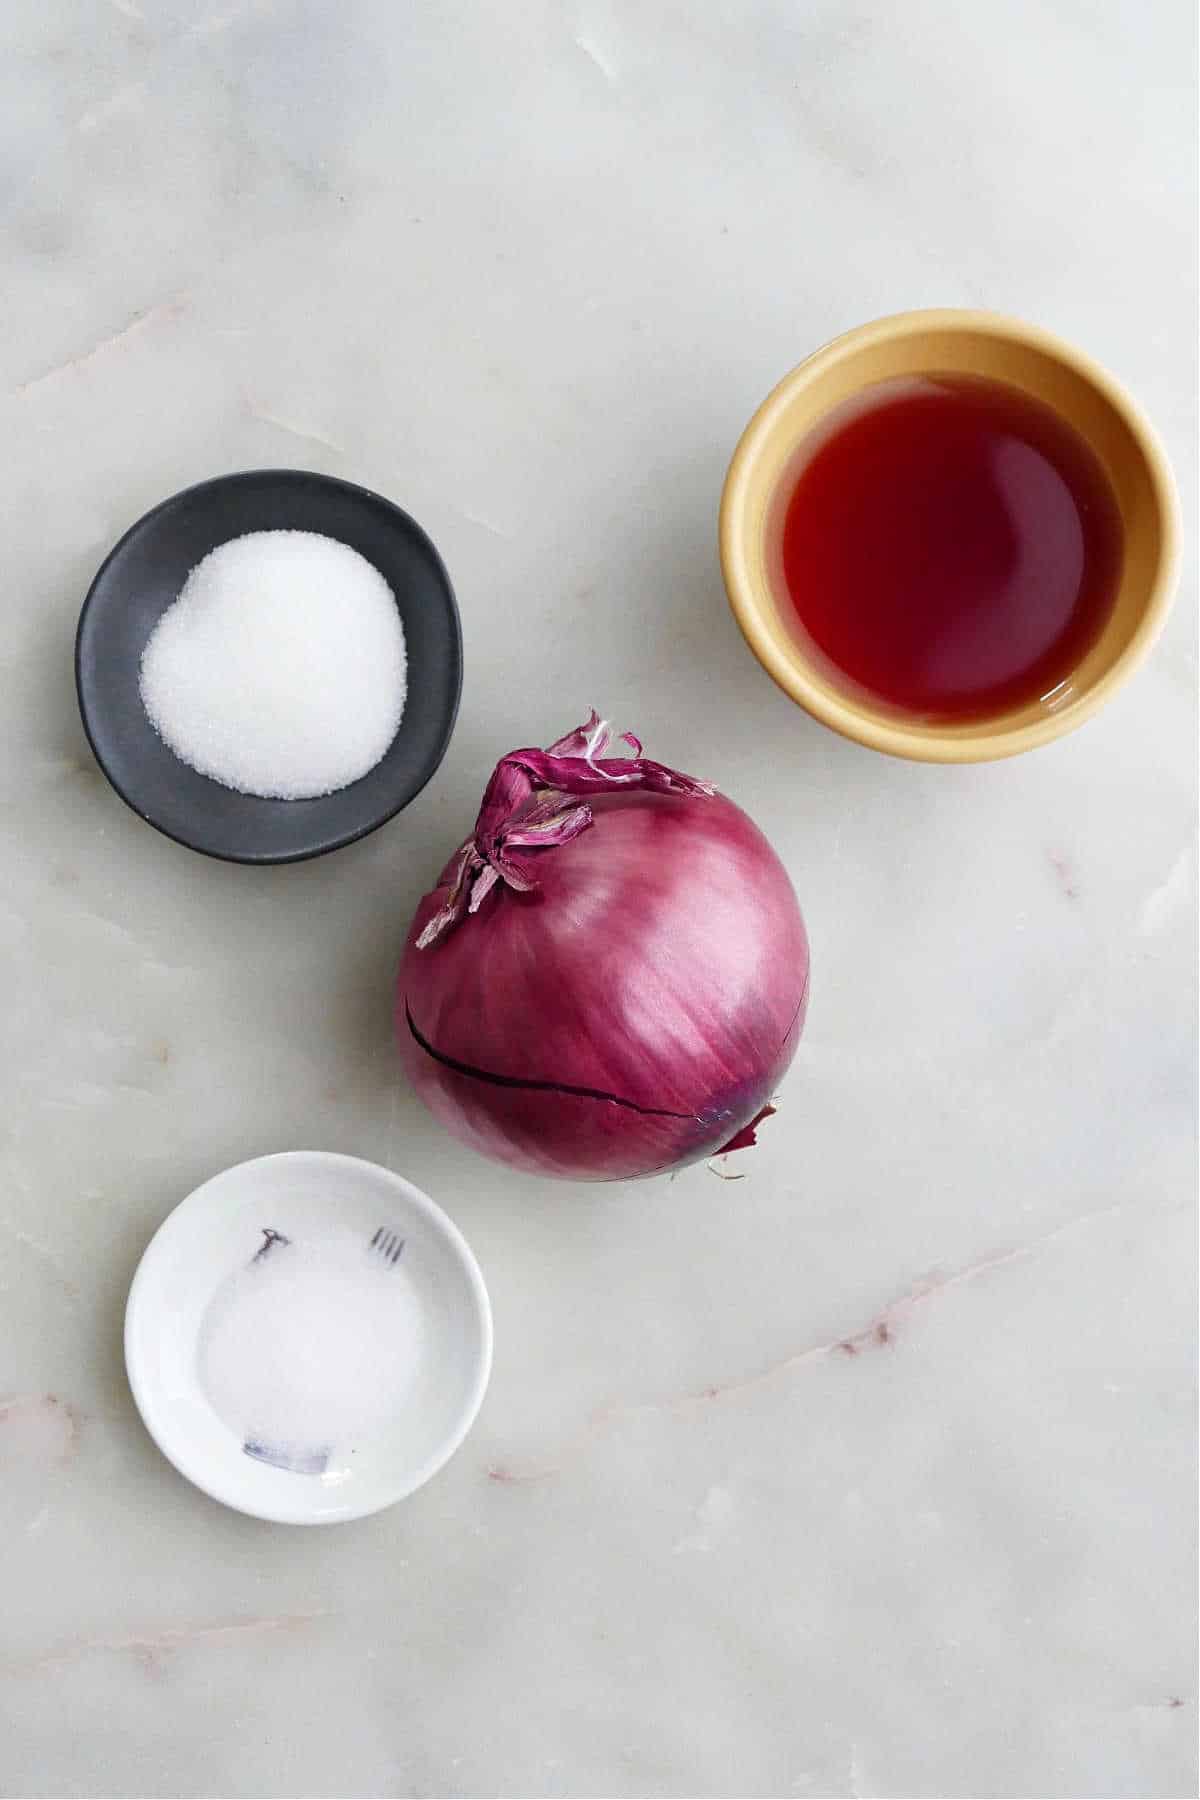 sugar, red wine vinegar, salt, and a red onion next to each other on a counter